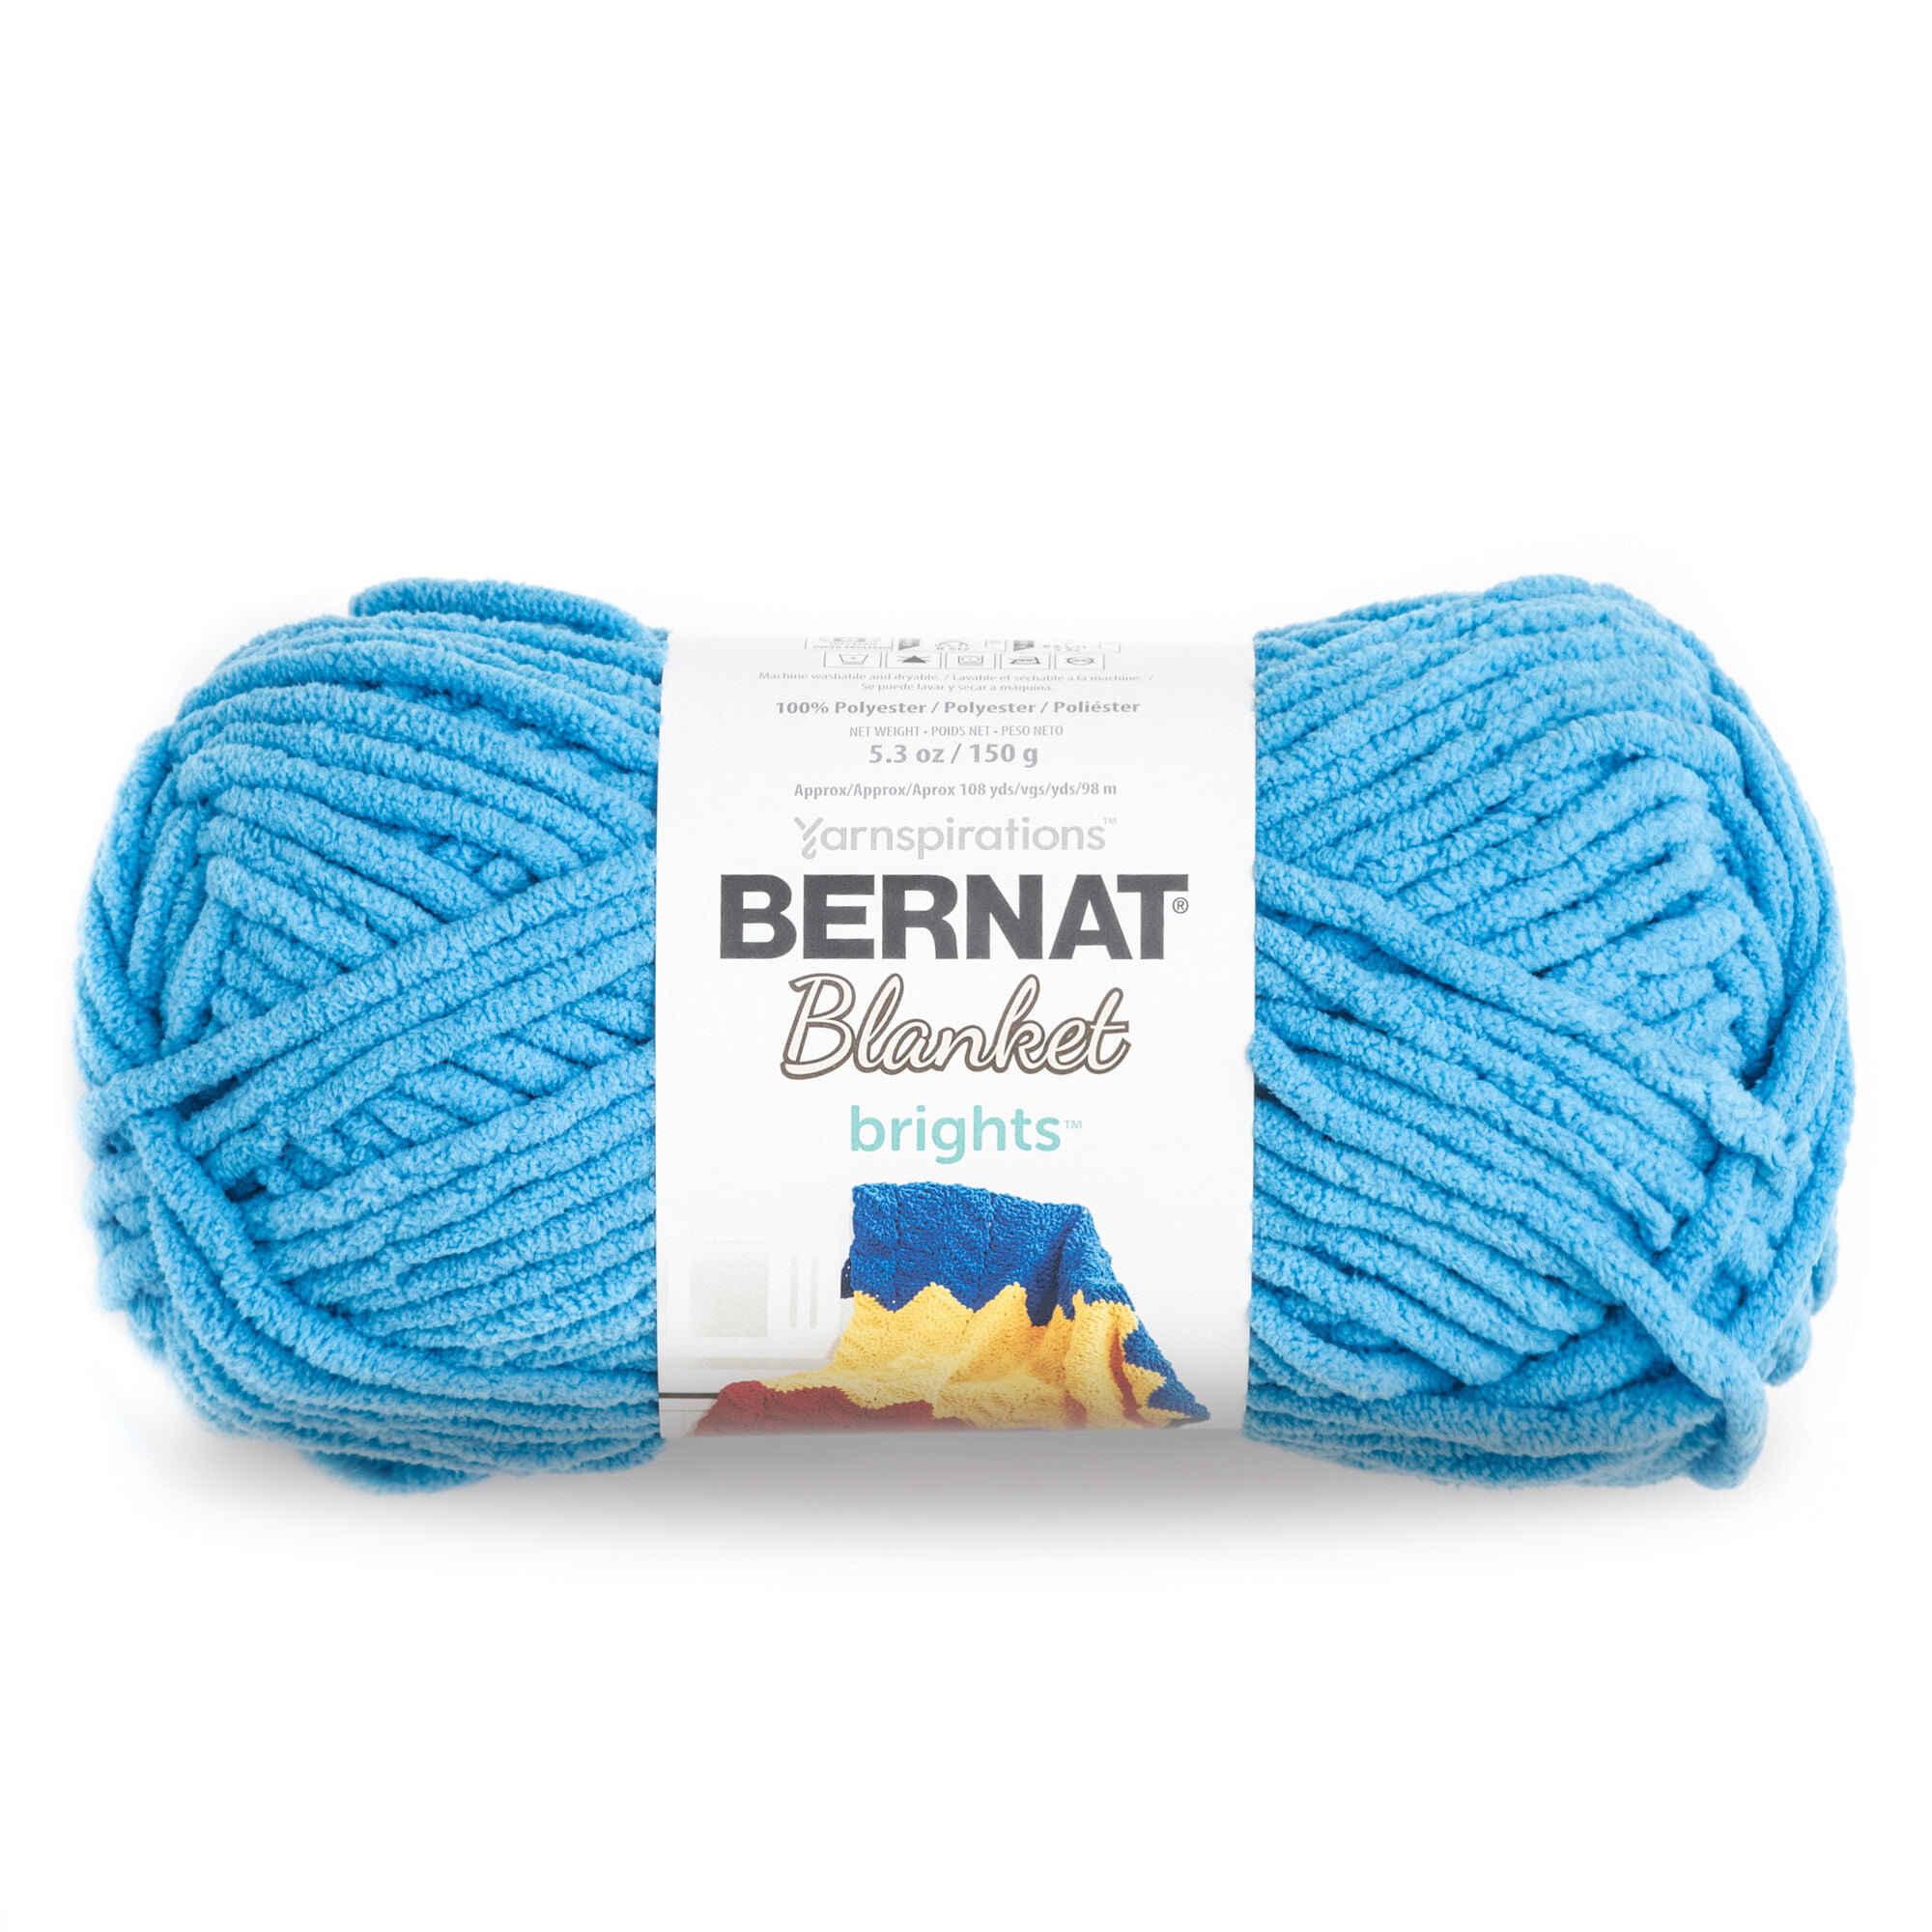 Multipack of 6 - Bernat Blanket Brights Yarn-Race Car Red, Notions  Marketing Employees, Friends and Families